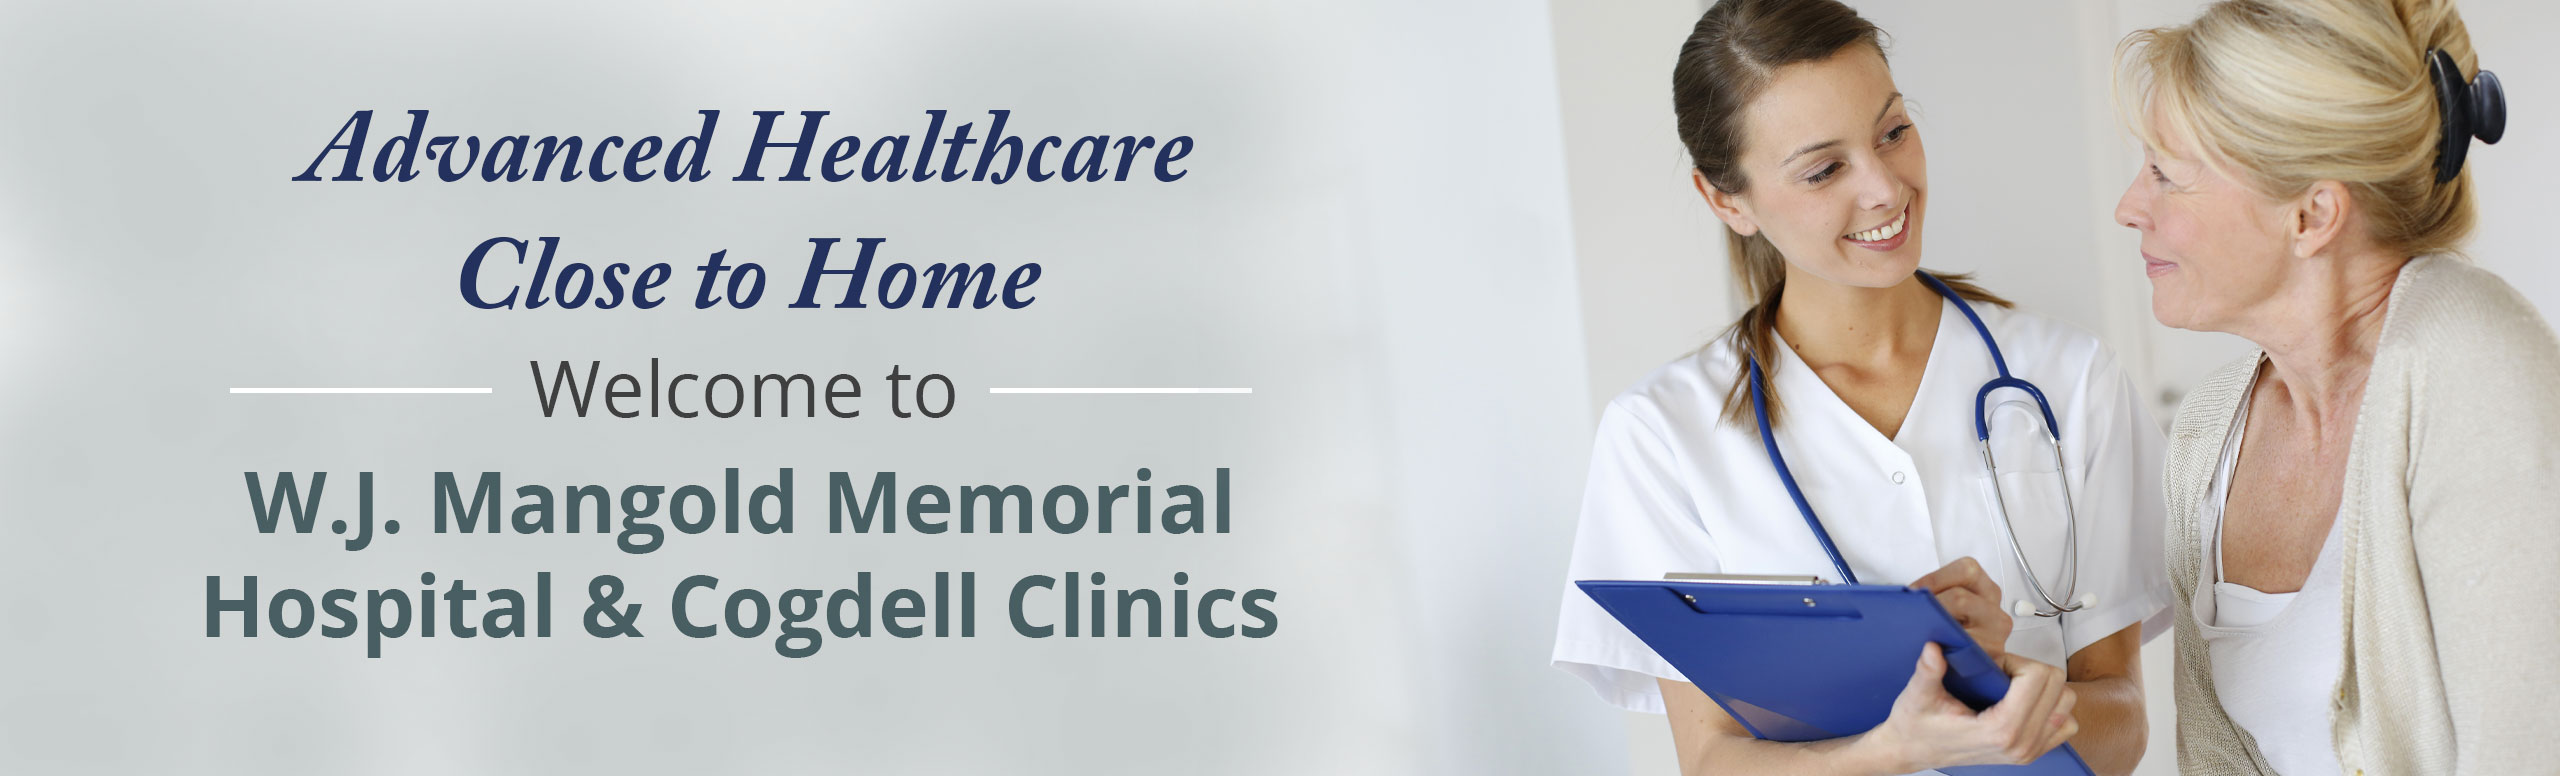 Banner picture of a female Nurse holding a clipboard and pen. She is looking at an older female patient and they are smiling at each other. Banner says:
            Advanced Healthcare Close to Home
                 ______ Welcome to ______
W.J. Mangold Memorial Hospital & Cogdell Clinics